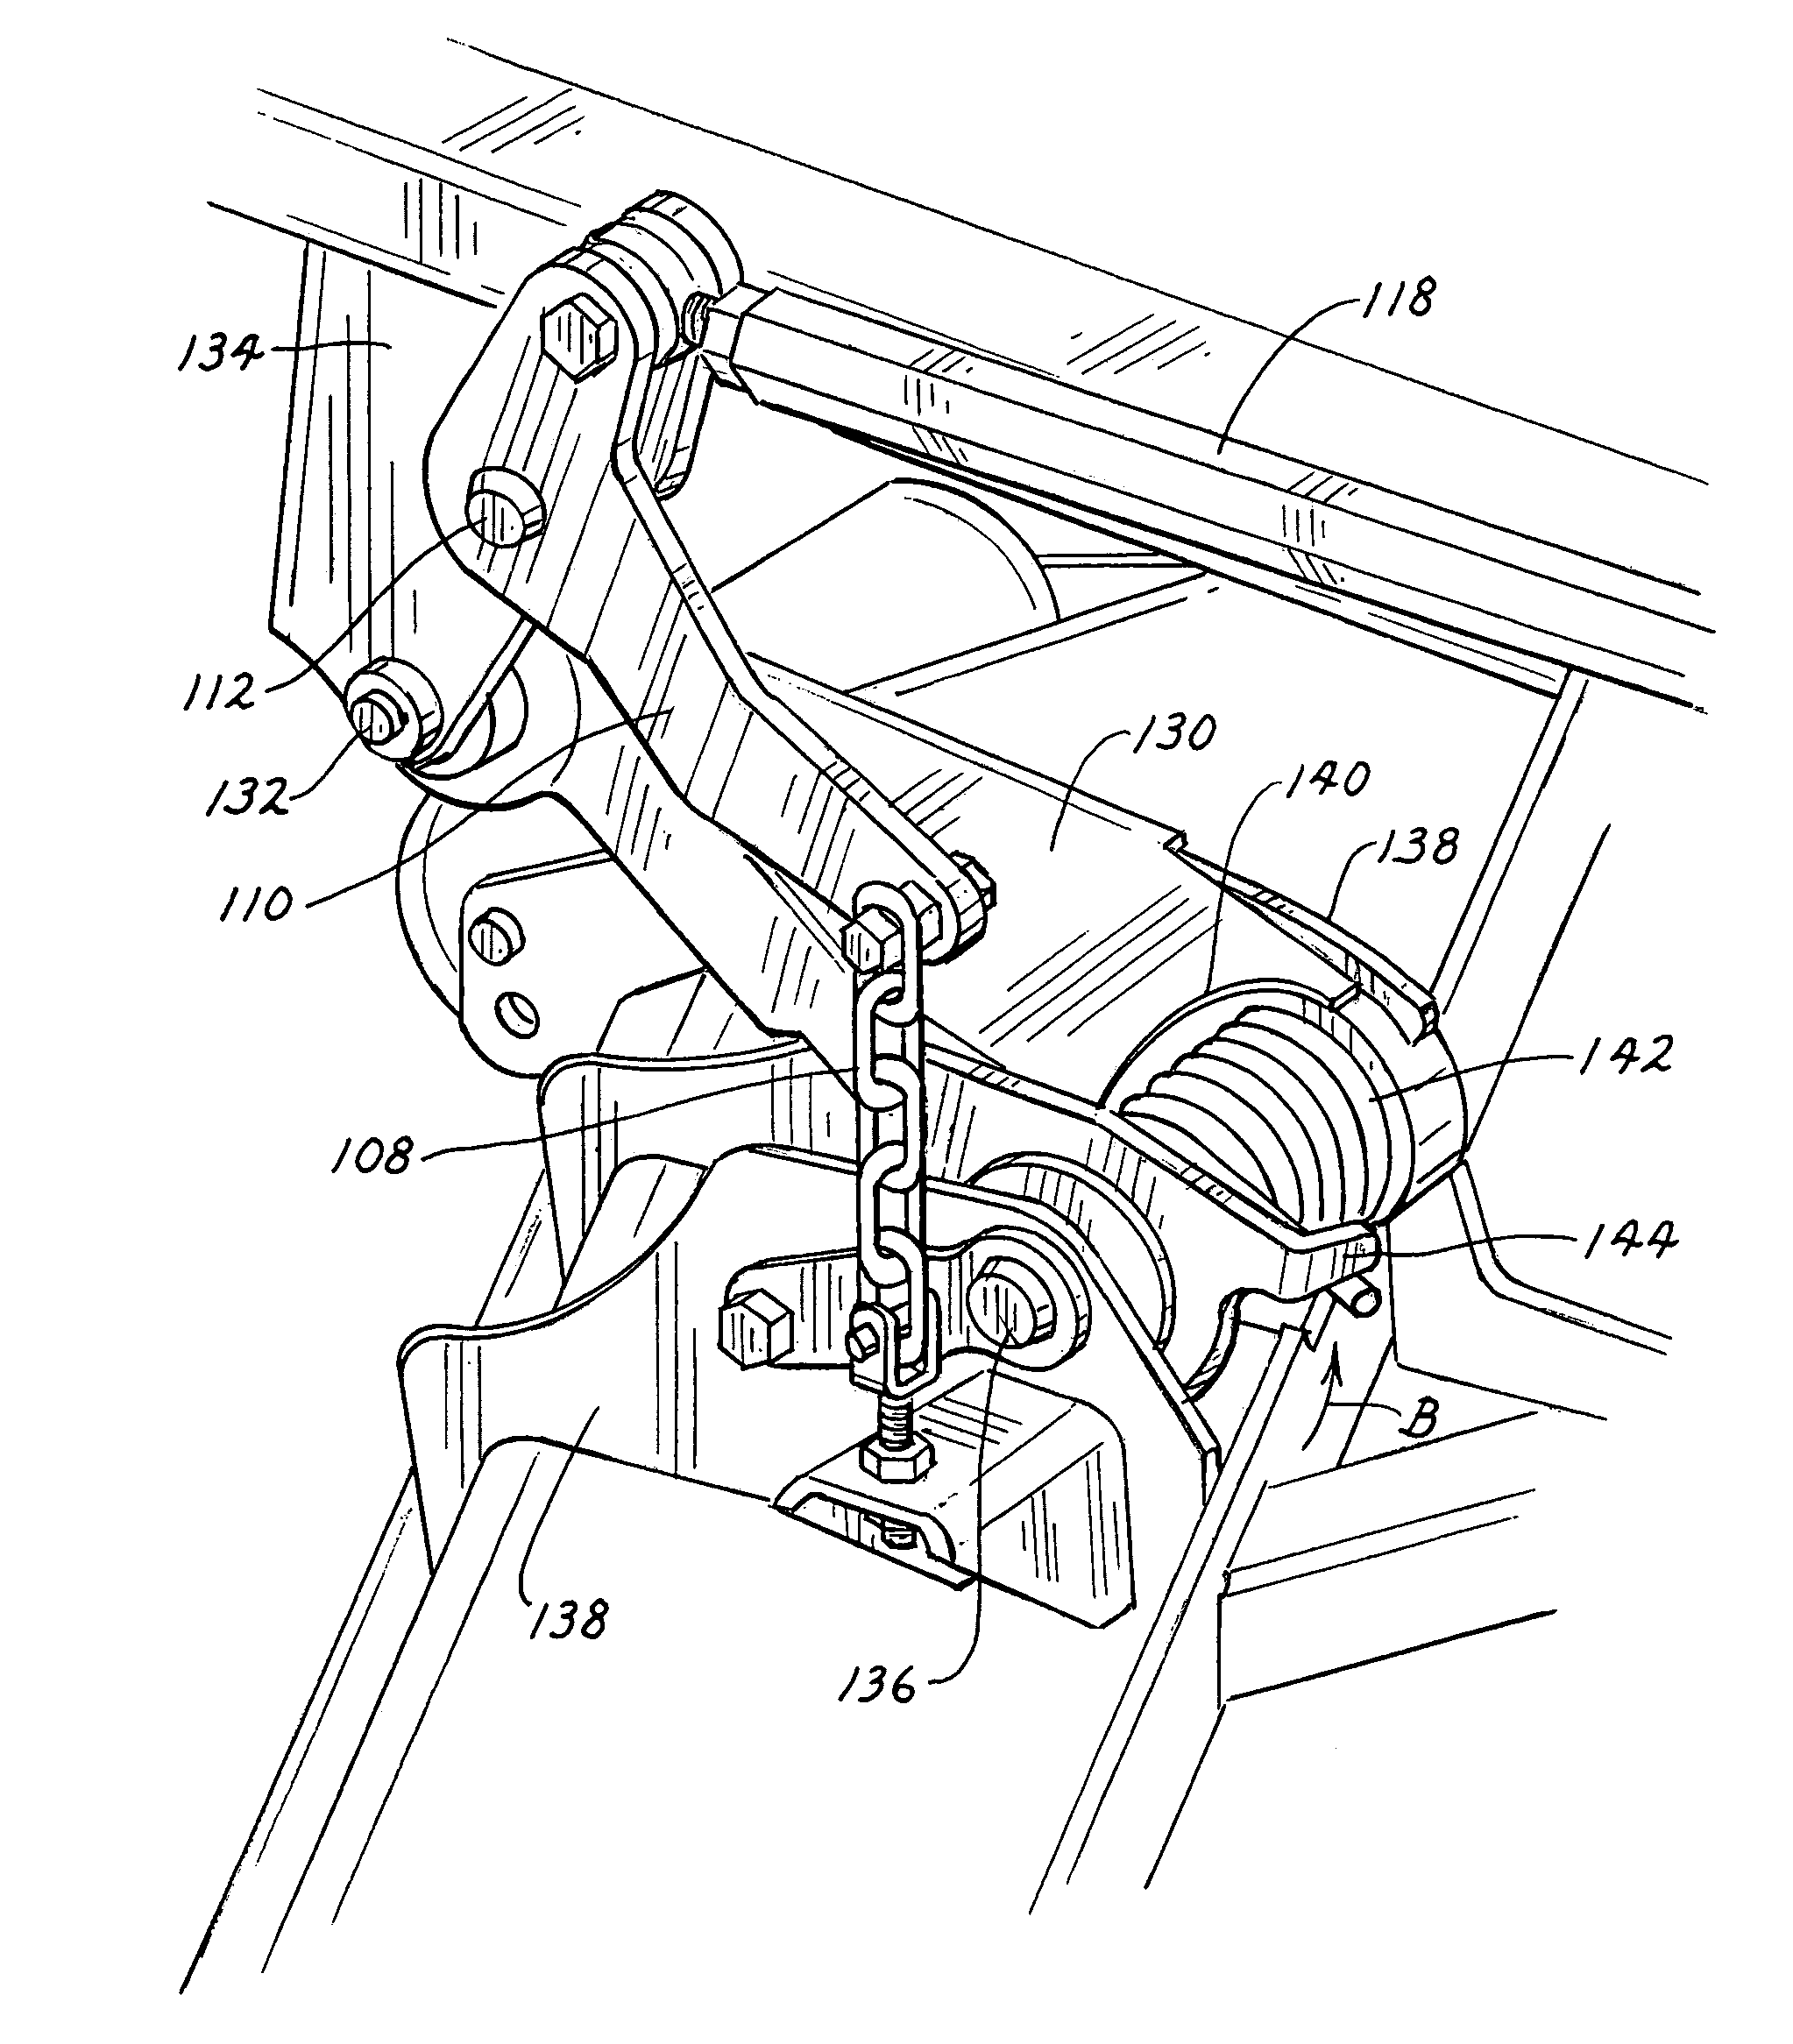 Mower with ground following cutting deck and weight transfer between deck and frame